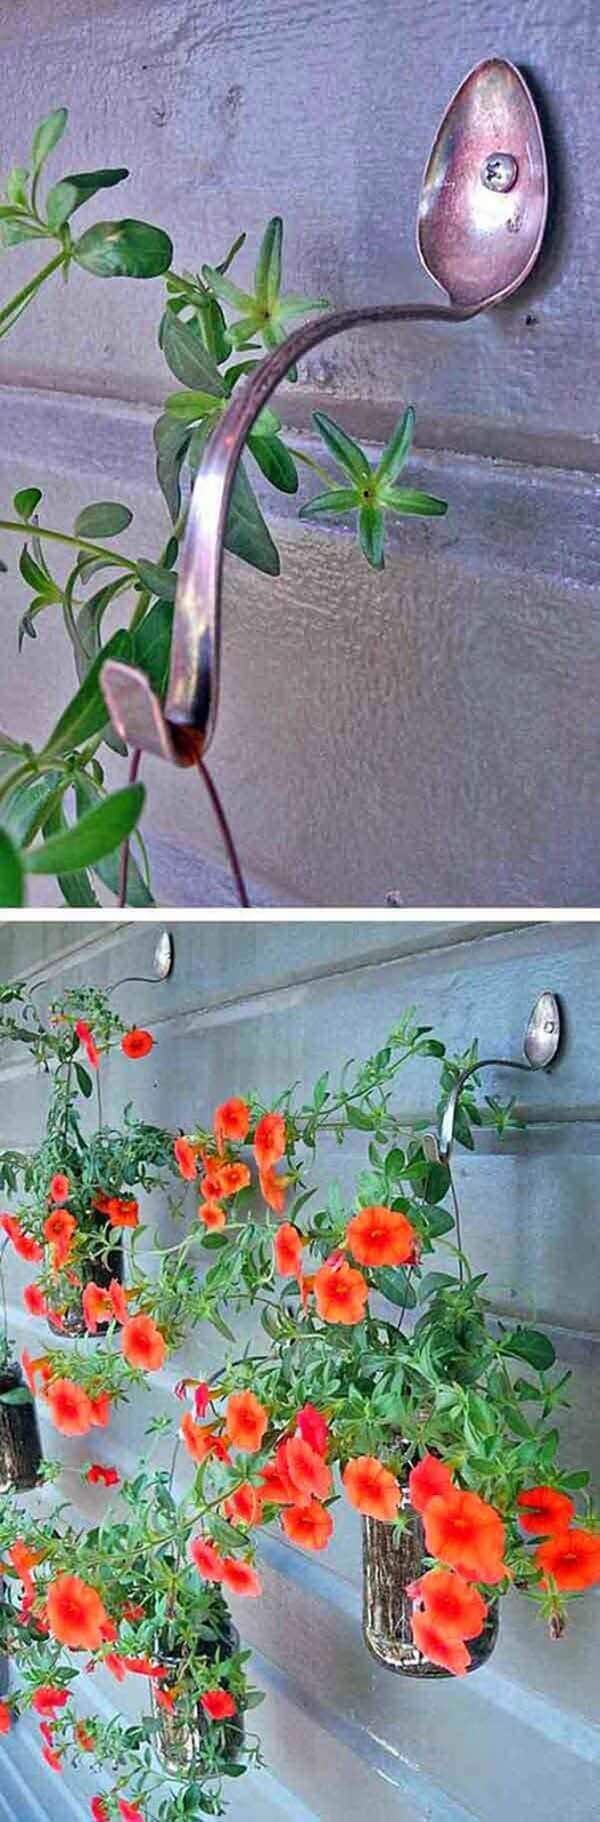 Hanging Basket Hooks Made From Spoons | DIY Outdoor Hanging Planter Ideas | Plant Pot Design Ideas